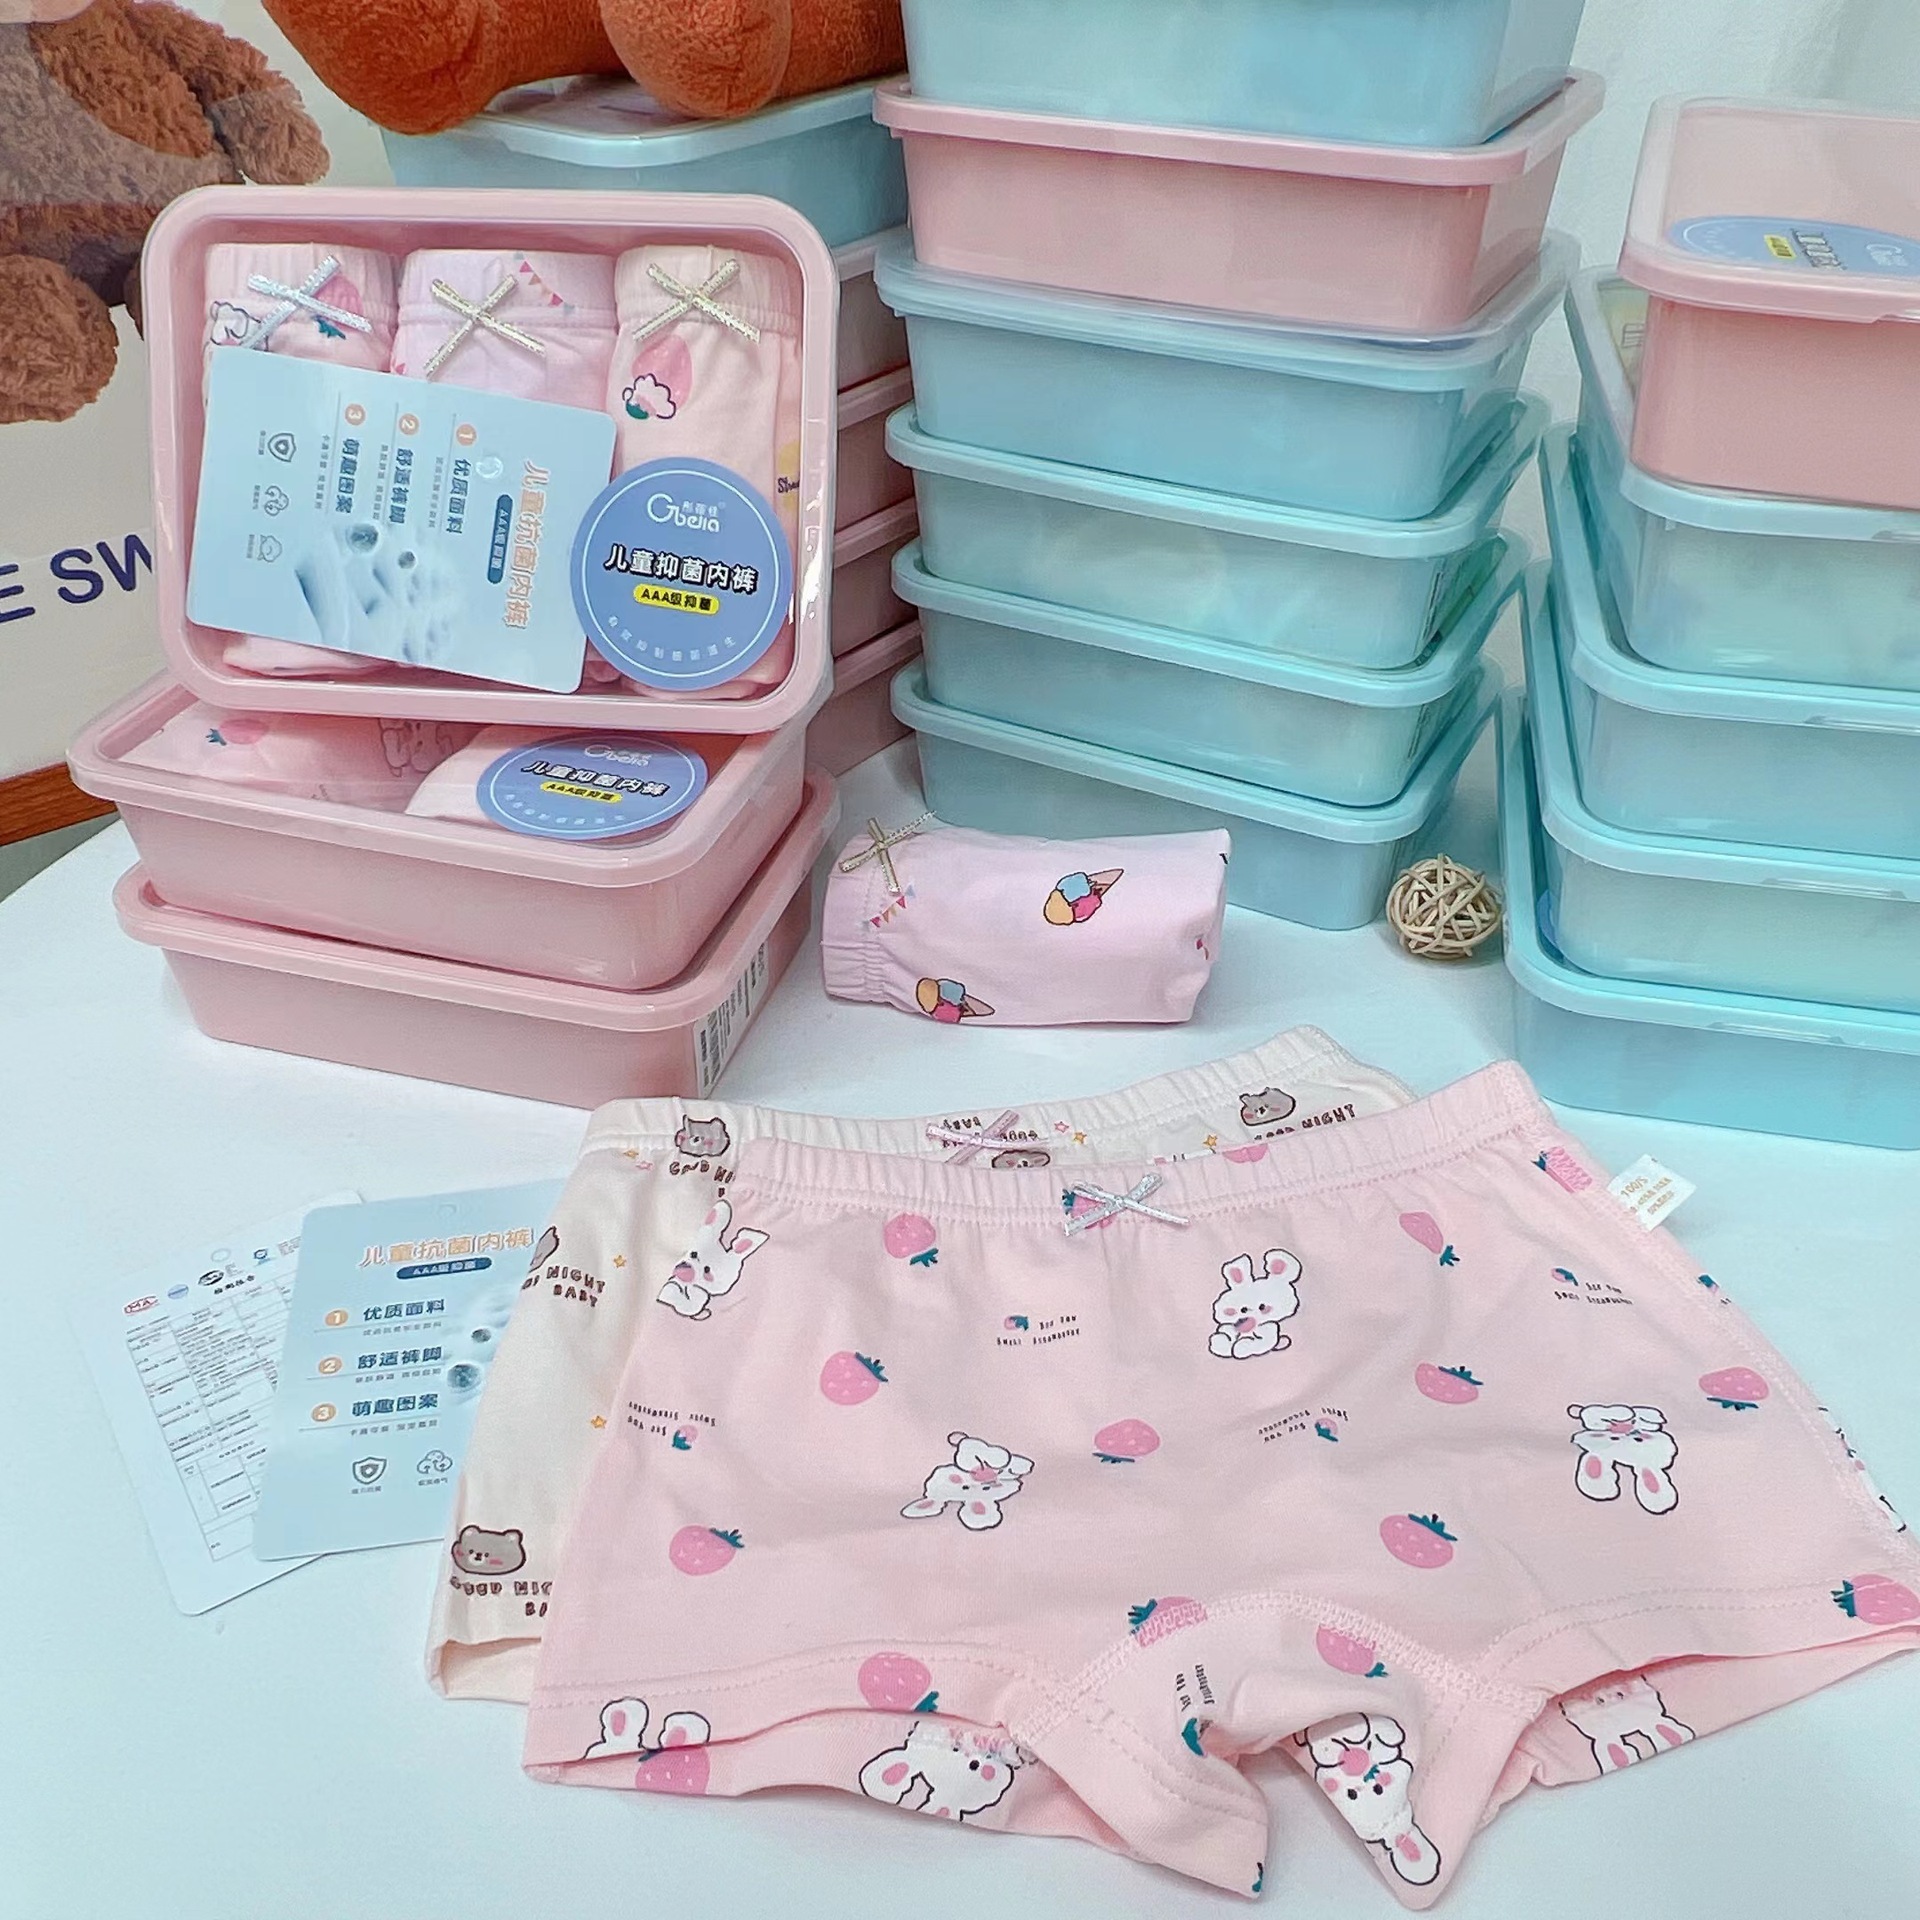 [3 Bento Boxes] Children's Yi Mushroom Underwear Children and Teens Cotton Modal Seamless Boxer Underpants for Boys and Girls